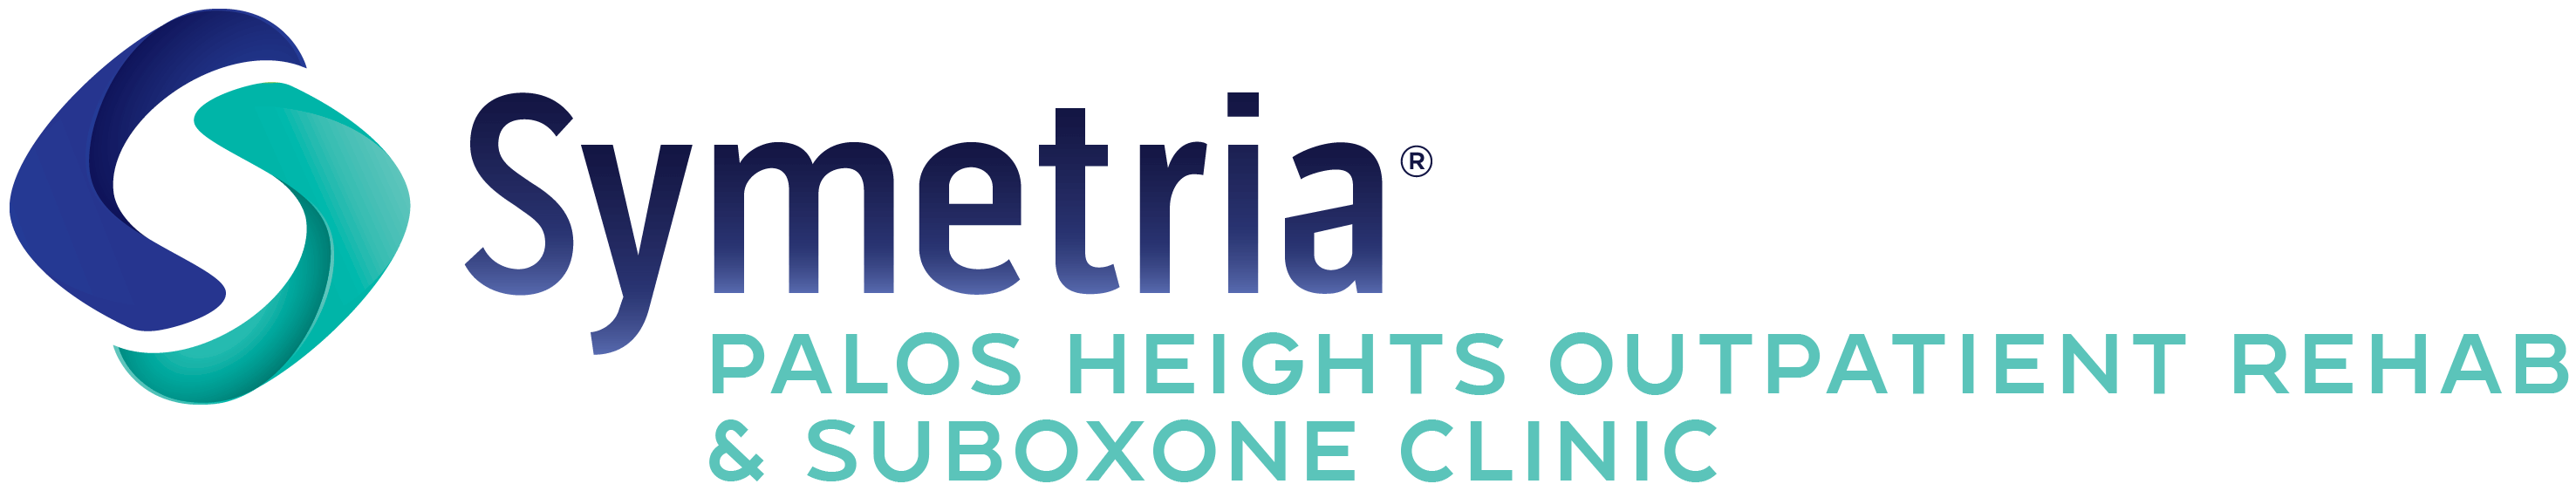 Symetria — Palos Heights Outpatient Rehab & Suboxone Clinic